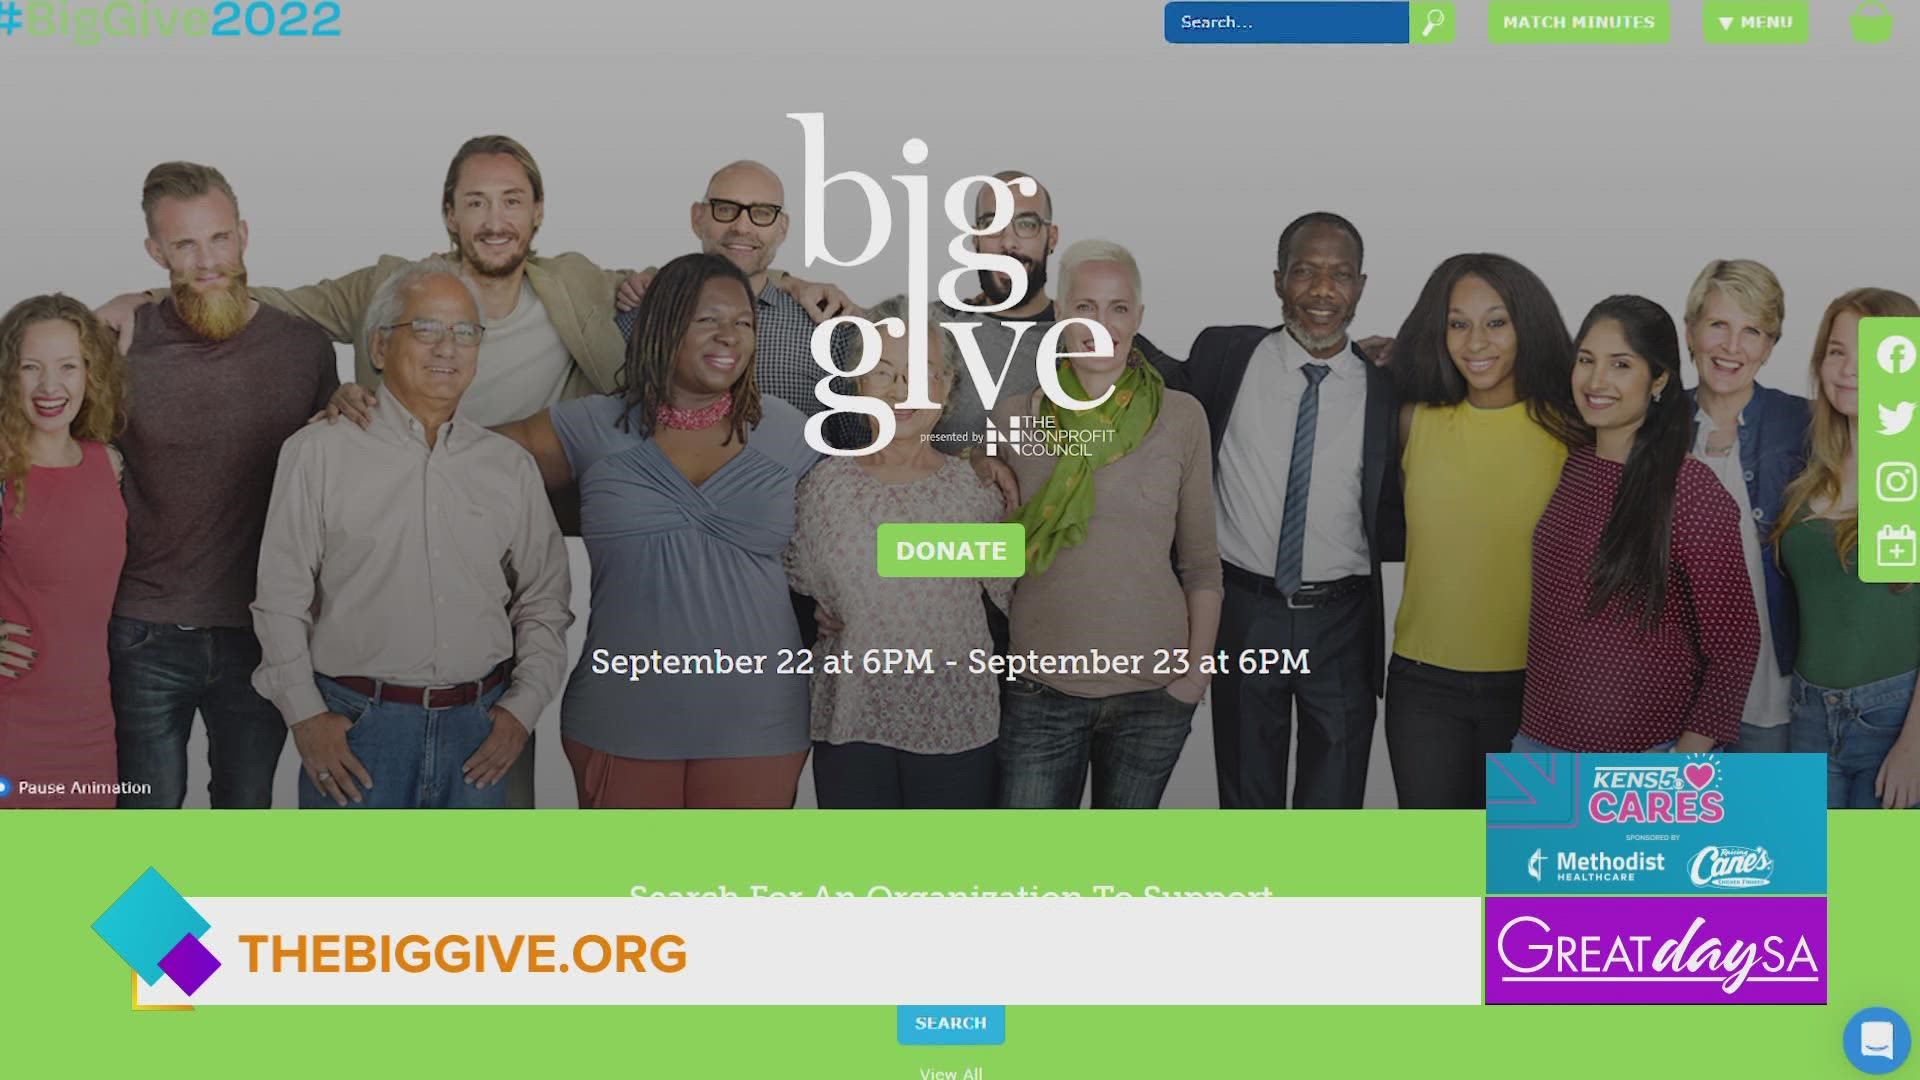 Support local nonprofits and give big! It’s only for 24 hours!